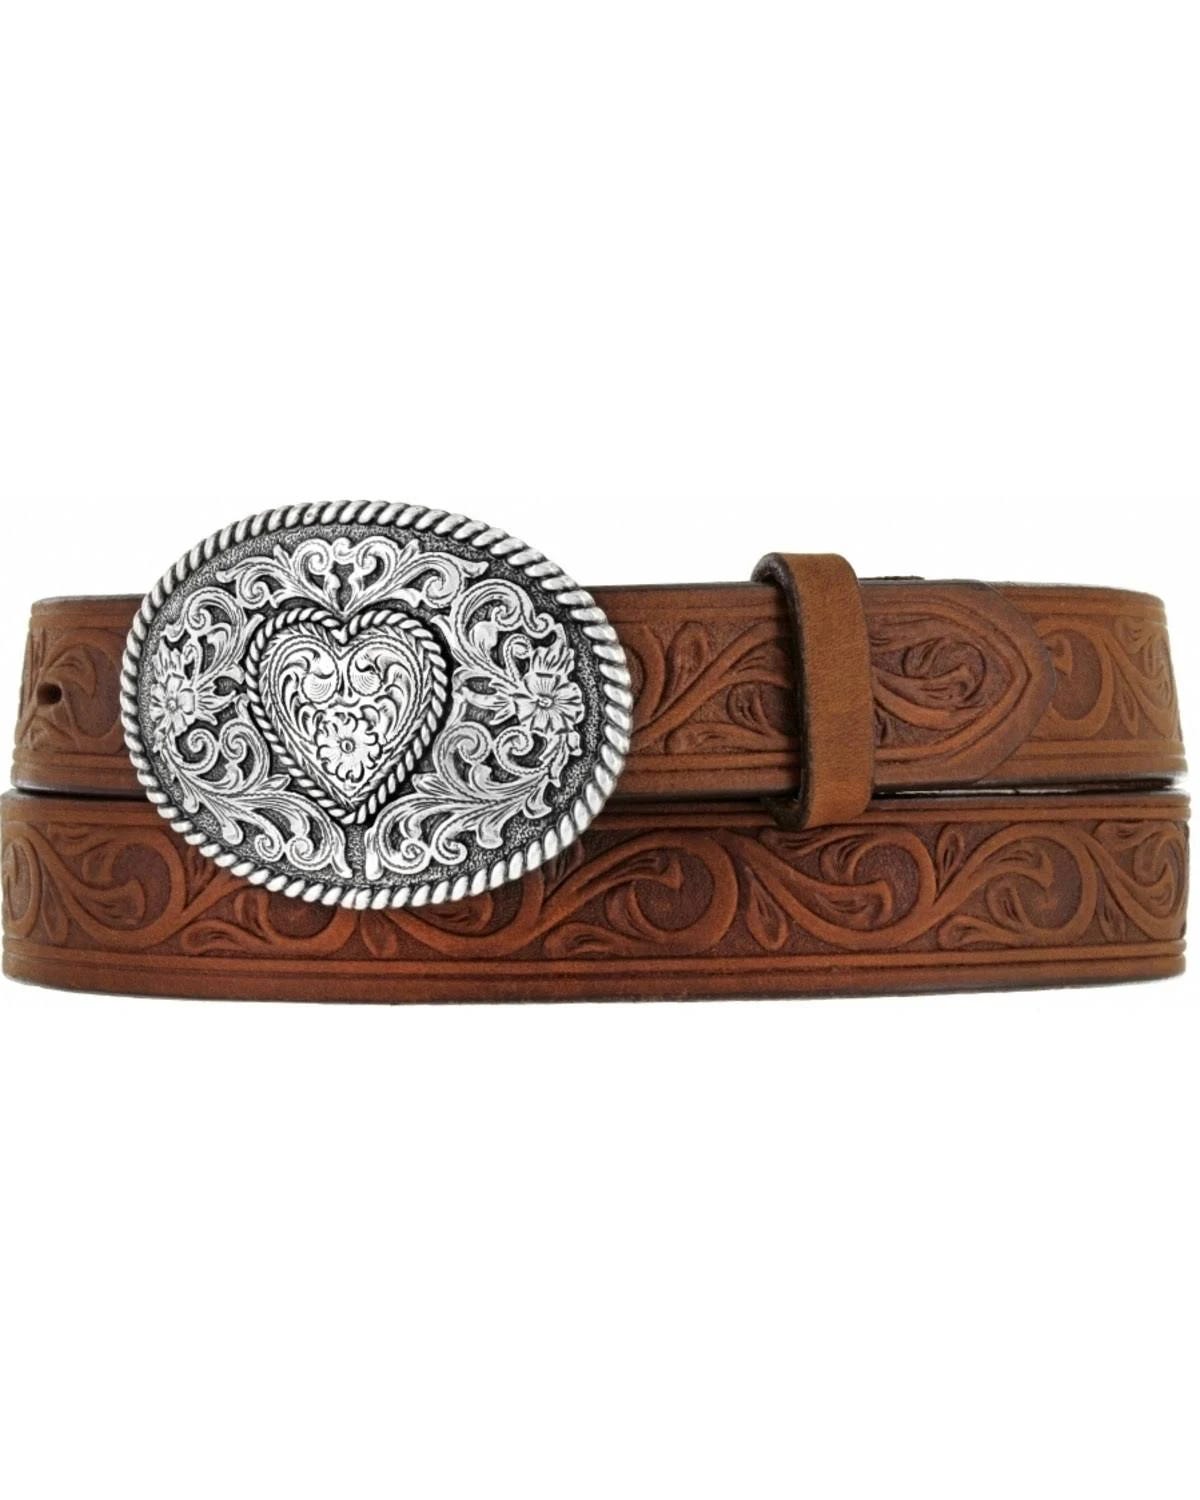 Genuine Leather Girls Cowgirl Belt with Western Scroll Design | Image